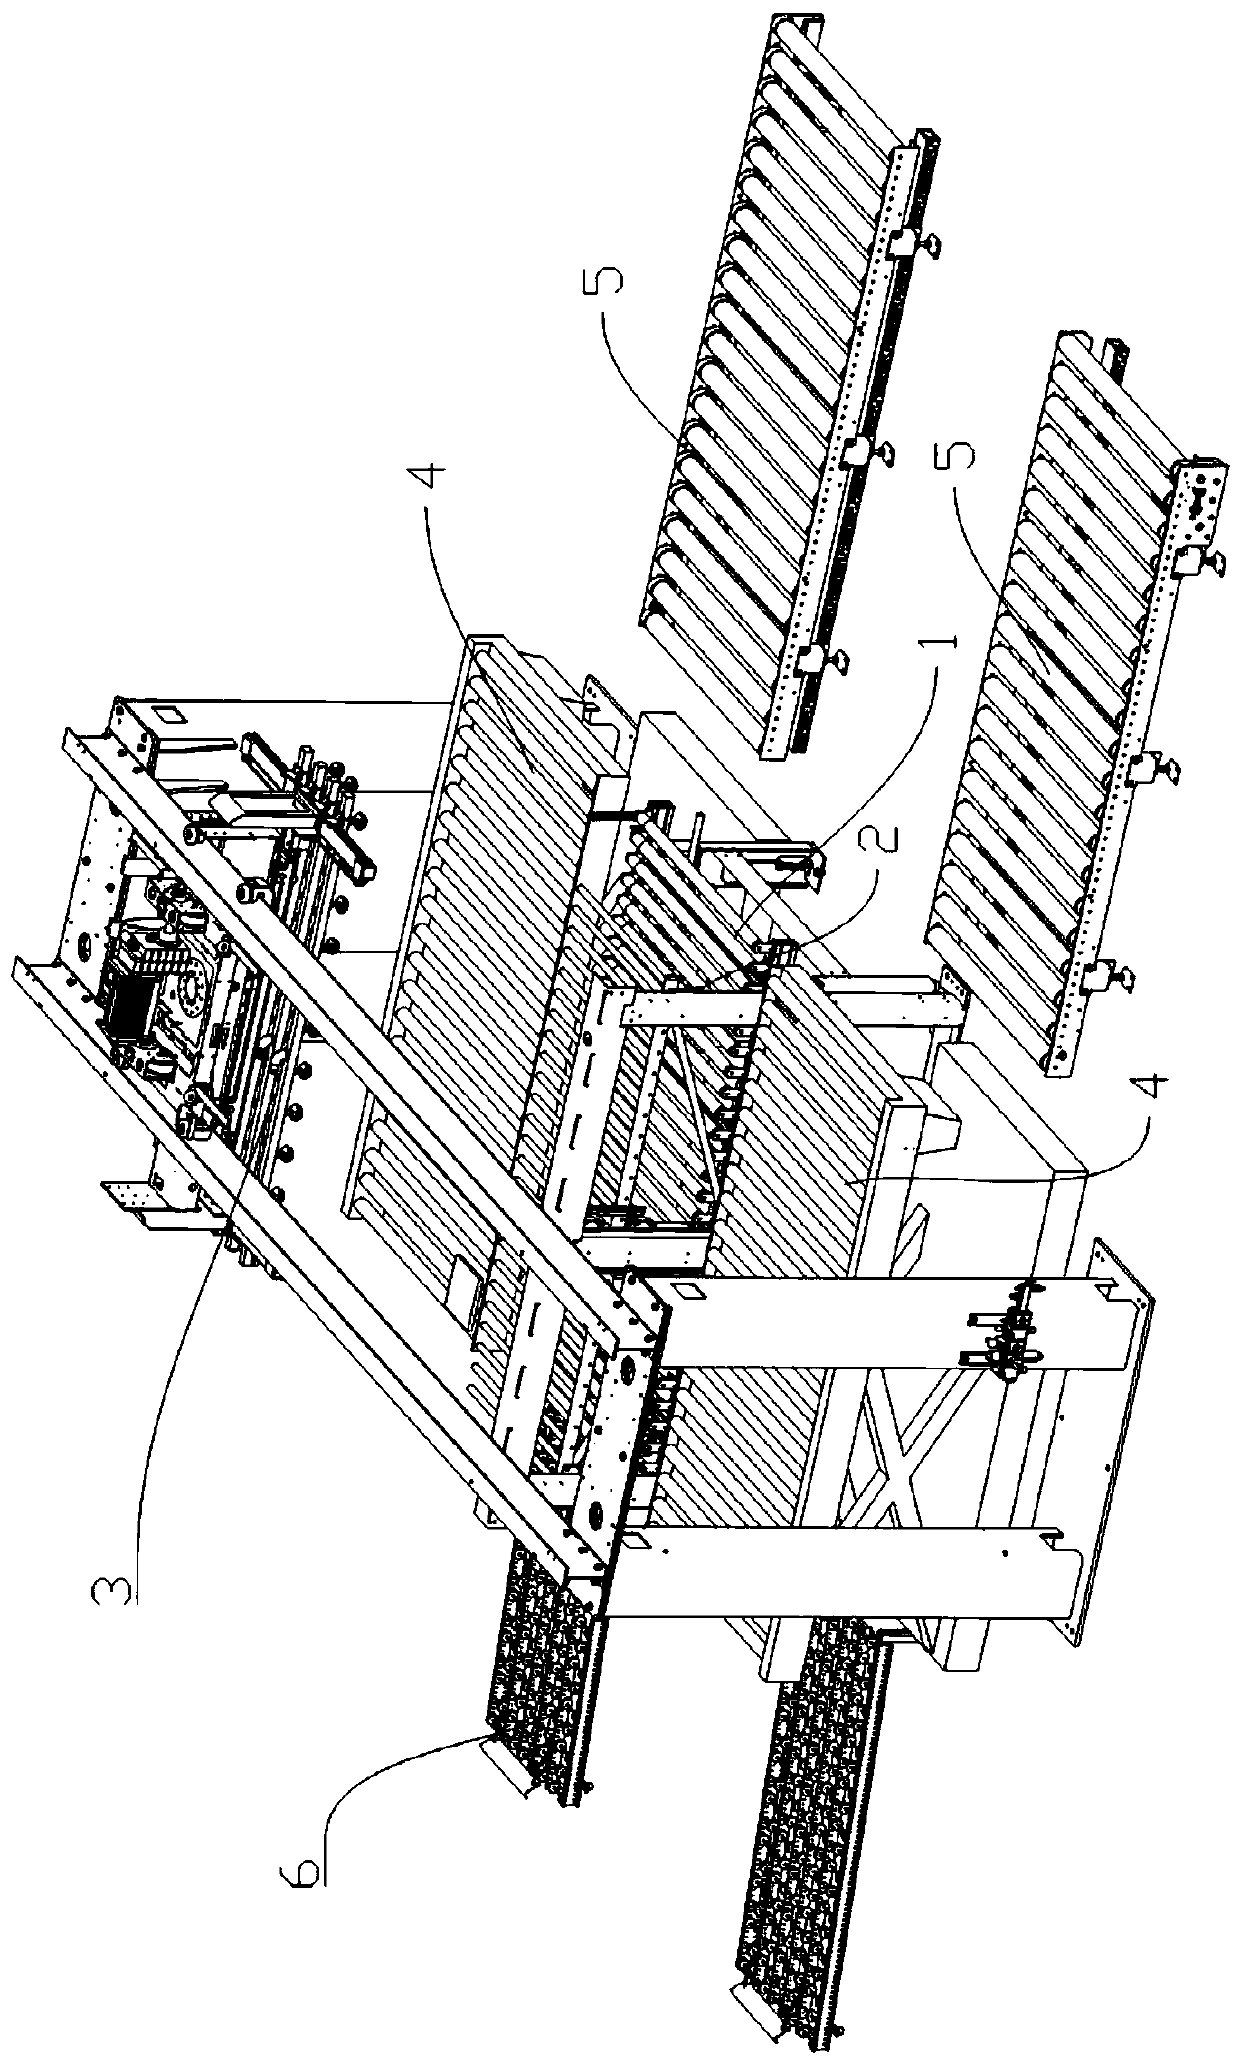 Technological method for double-station rapid loading of wood plates